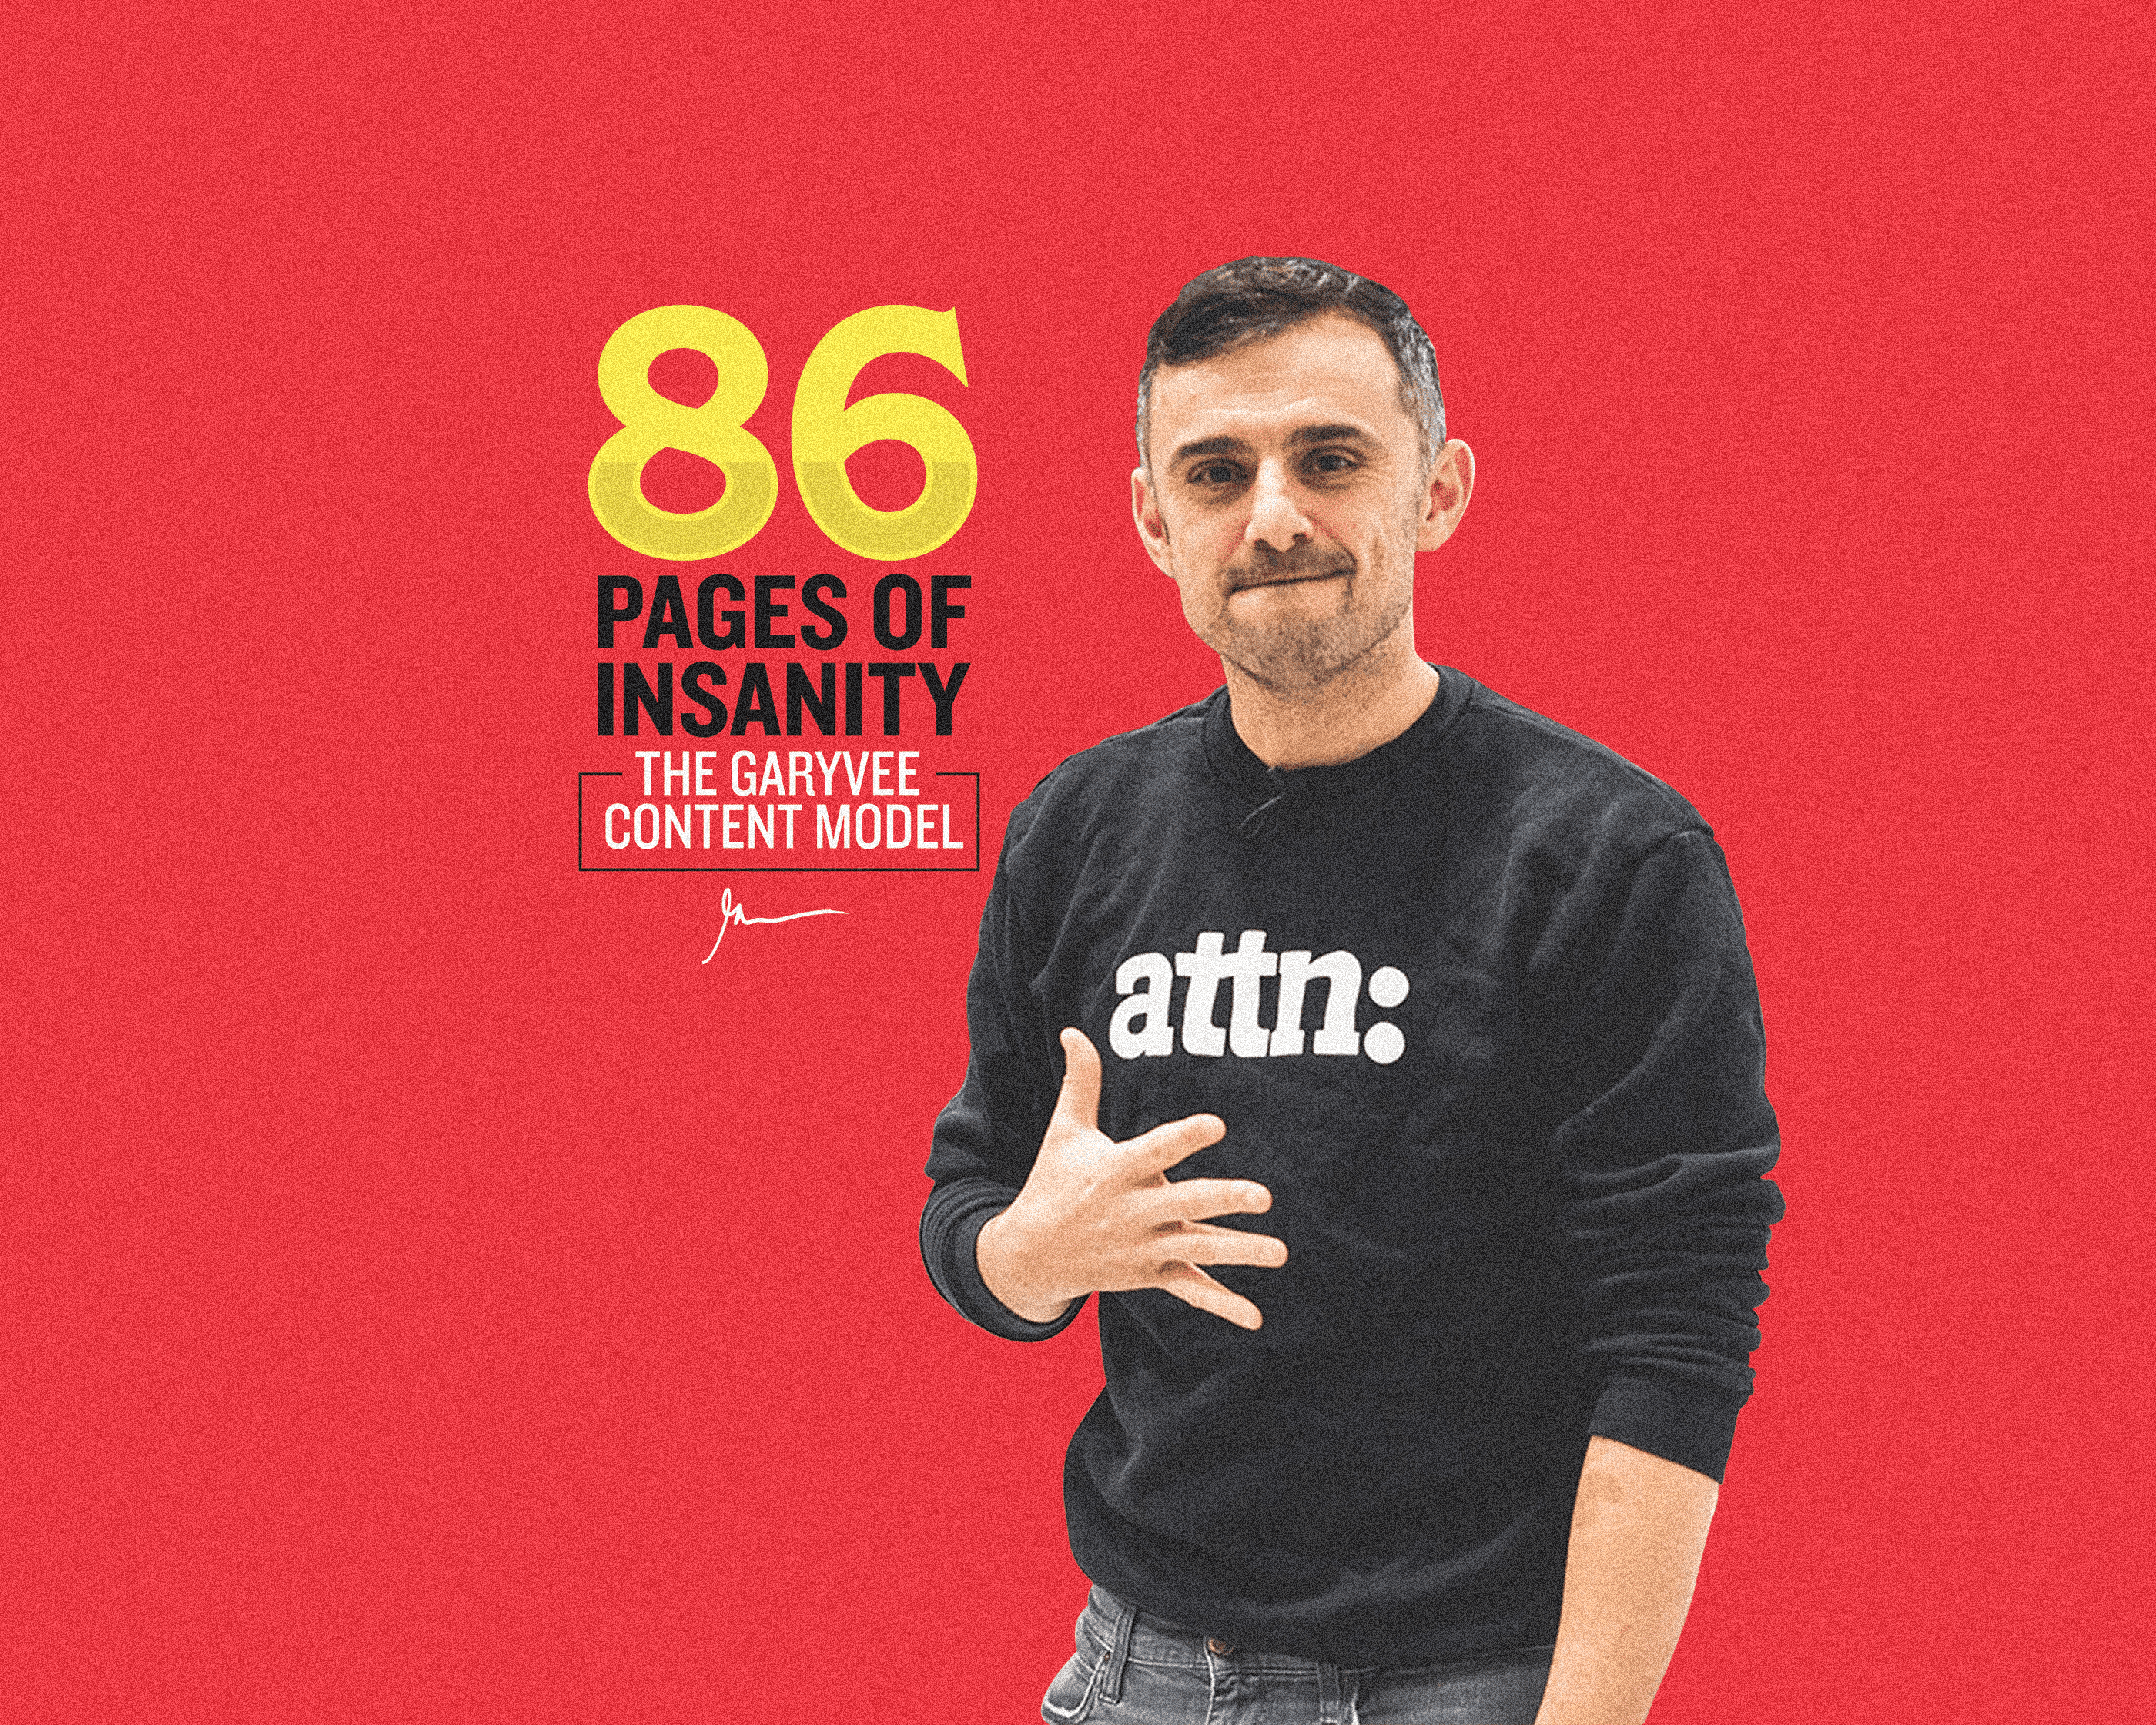 The GaryVee Content Strategy: How to Grow and Distribute Your Brand’s Social Media Content